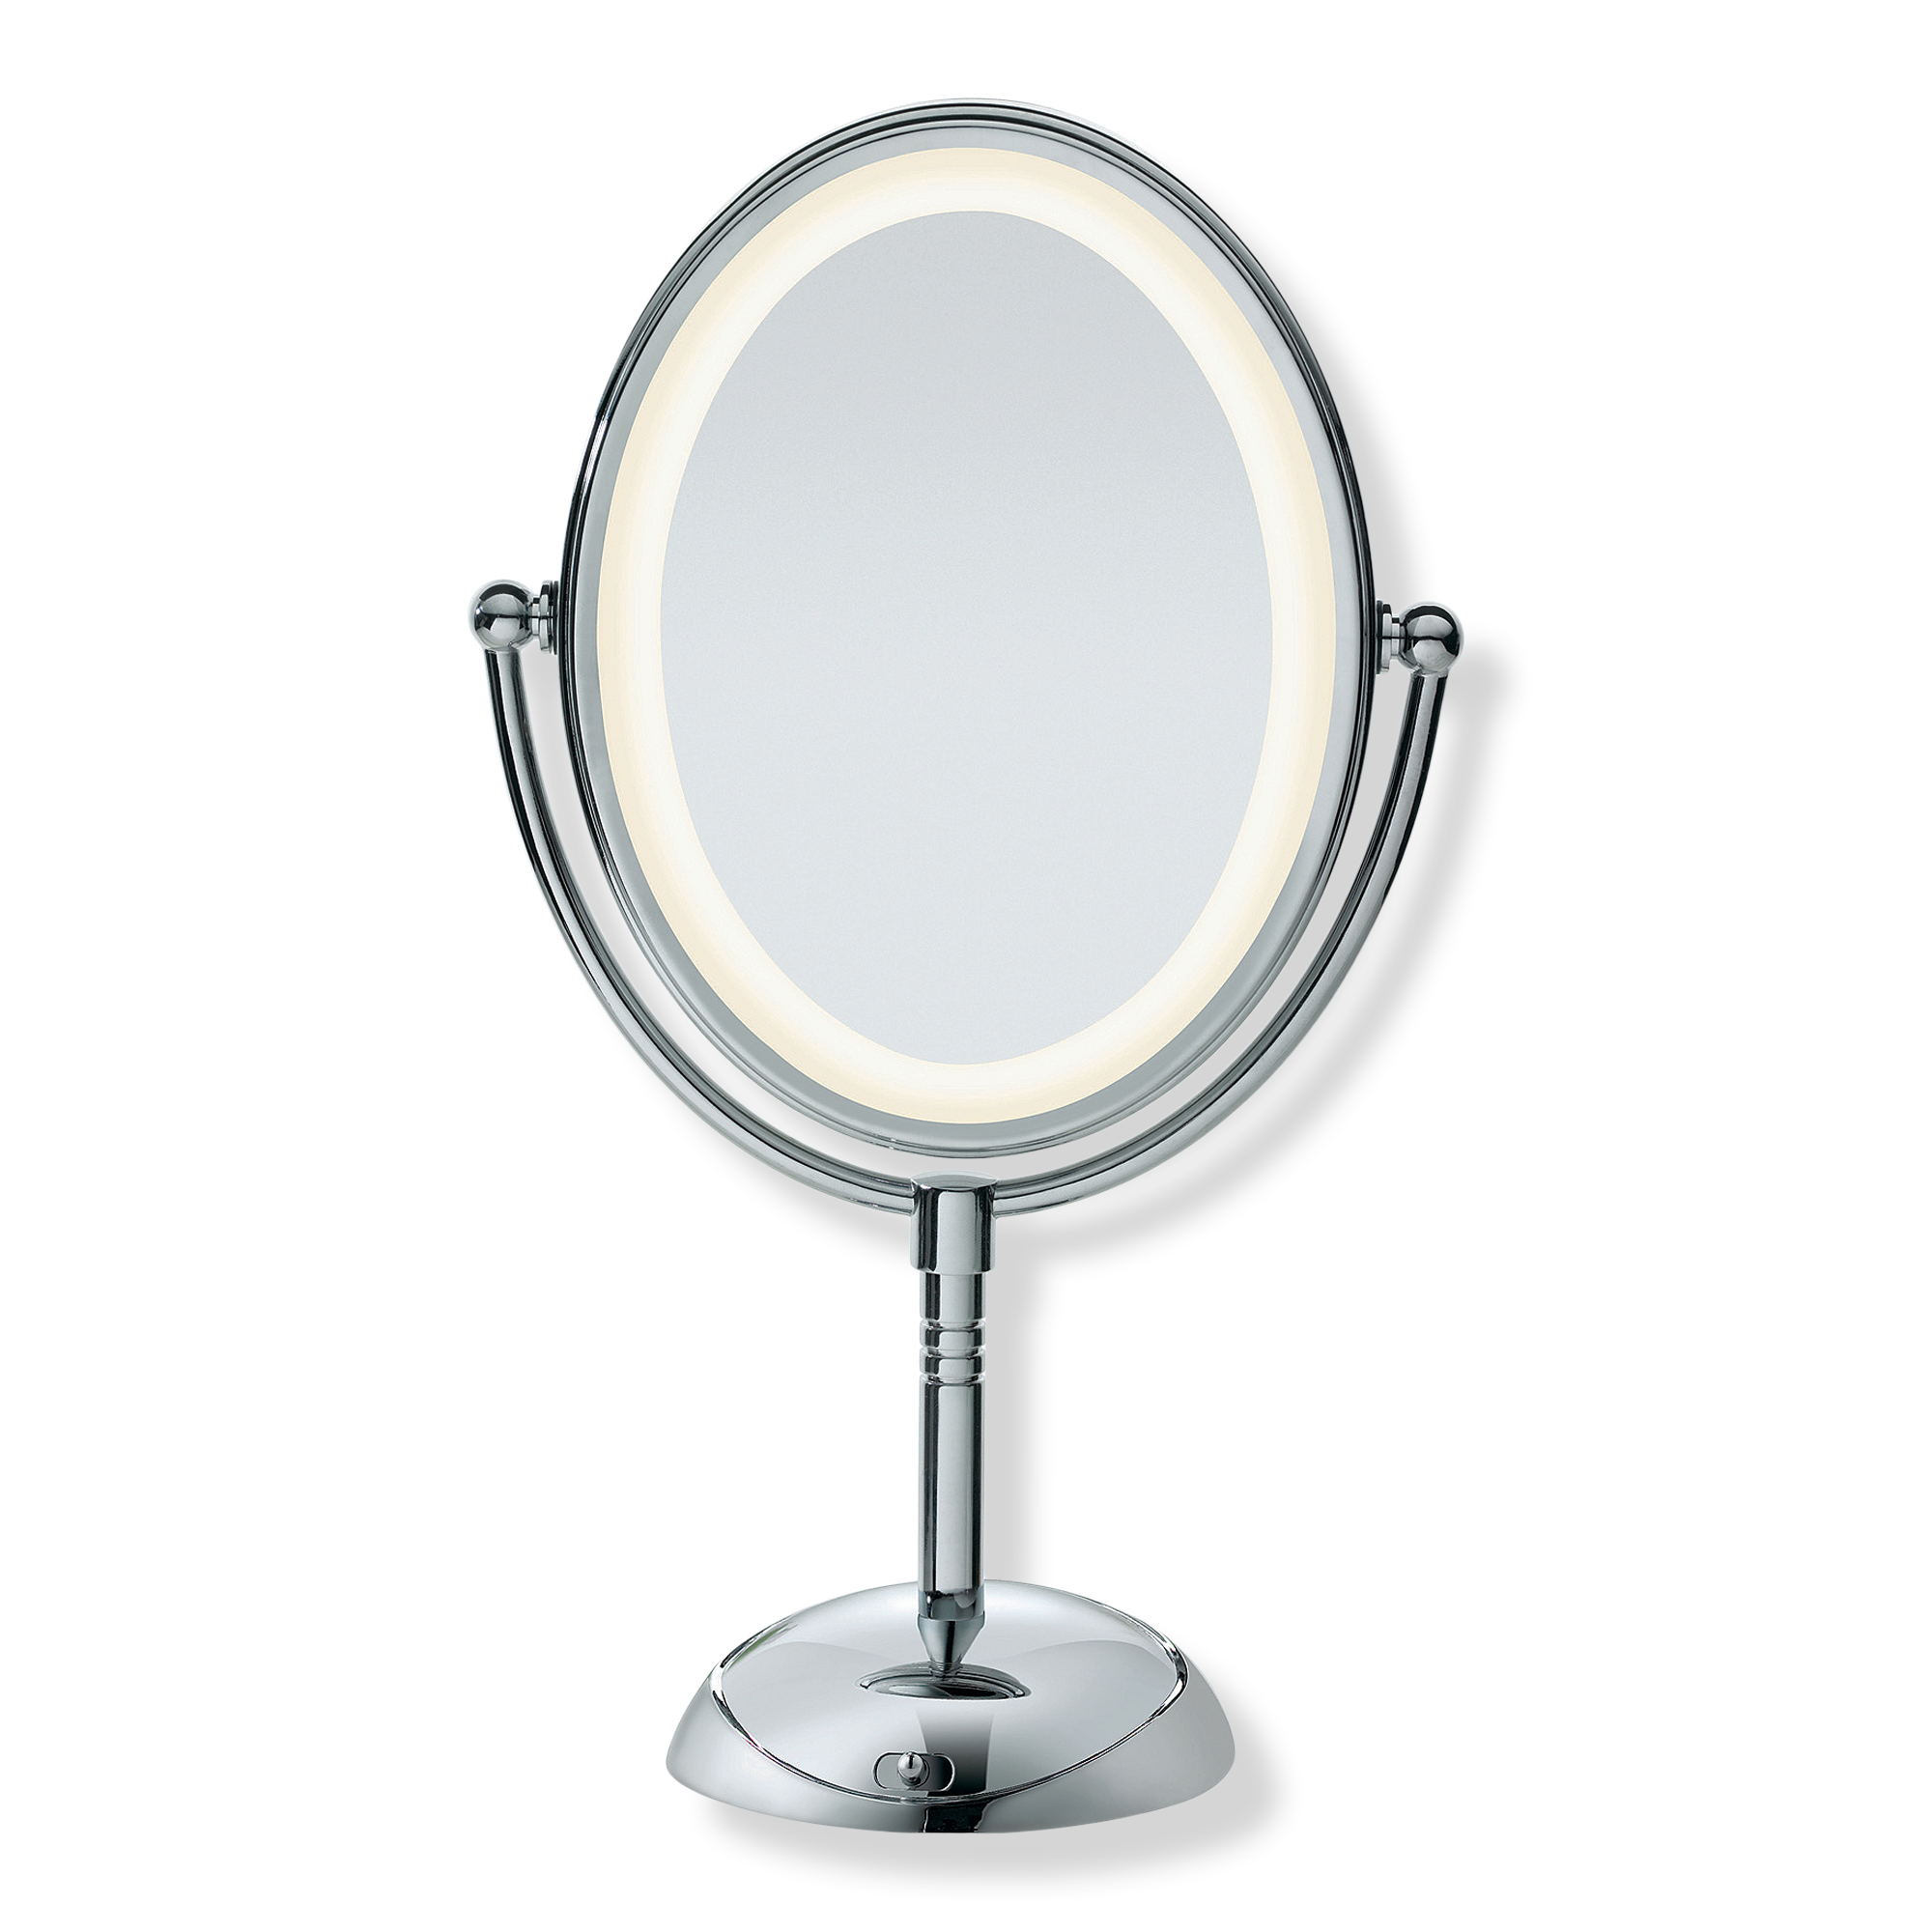 Reflections LED Lighted Double-Sided Mirror Conair Ulta Beauty